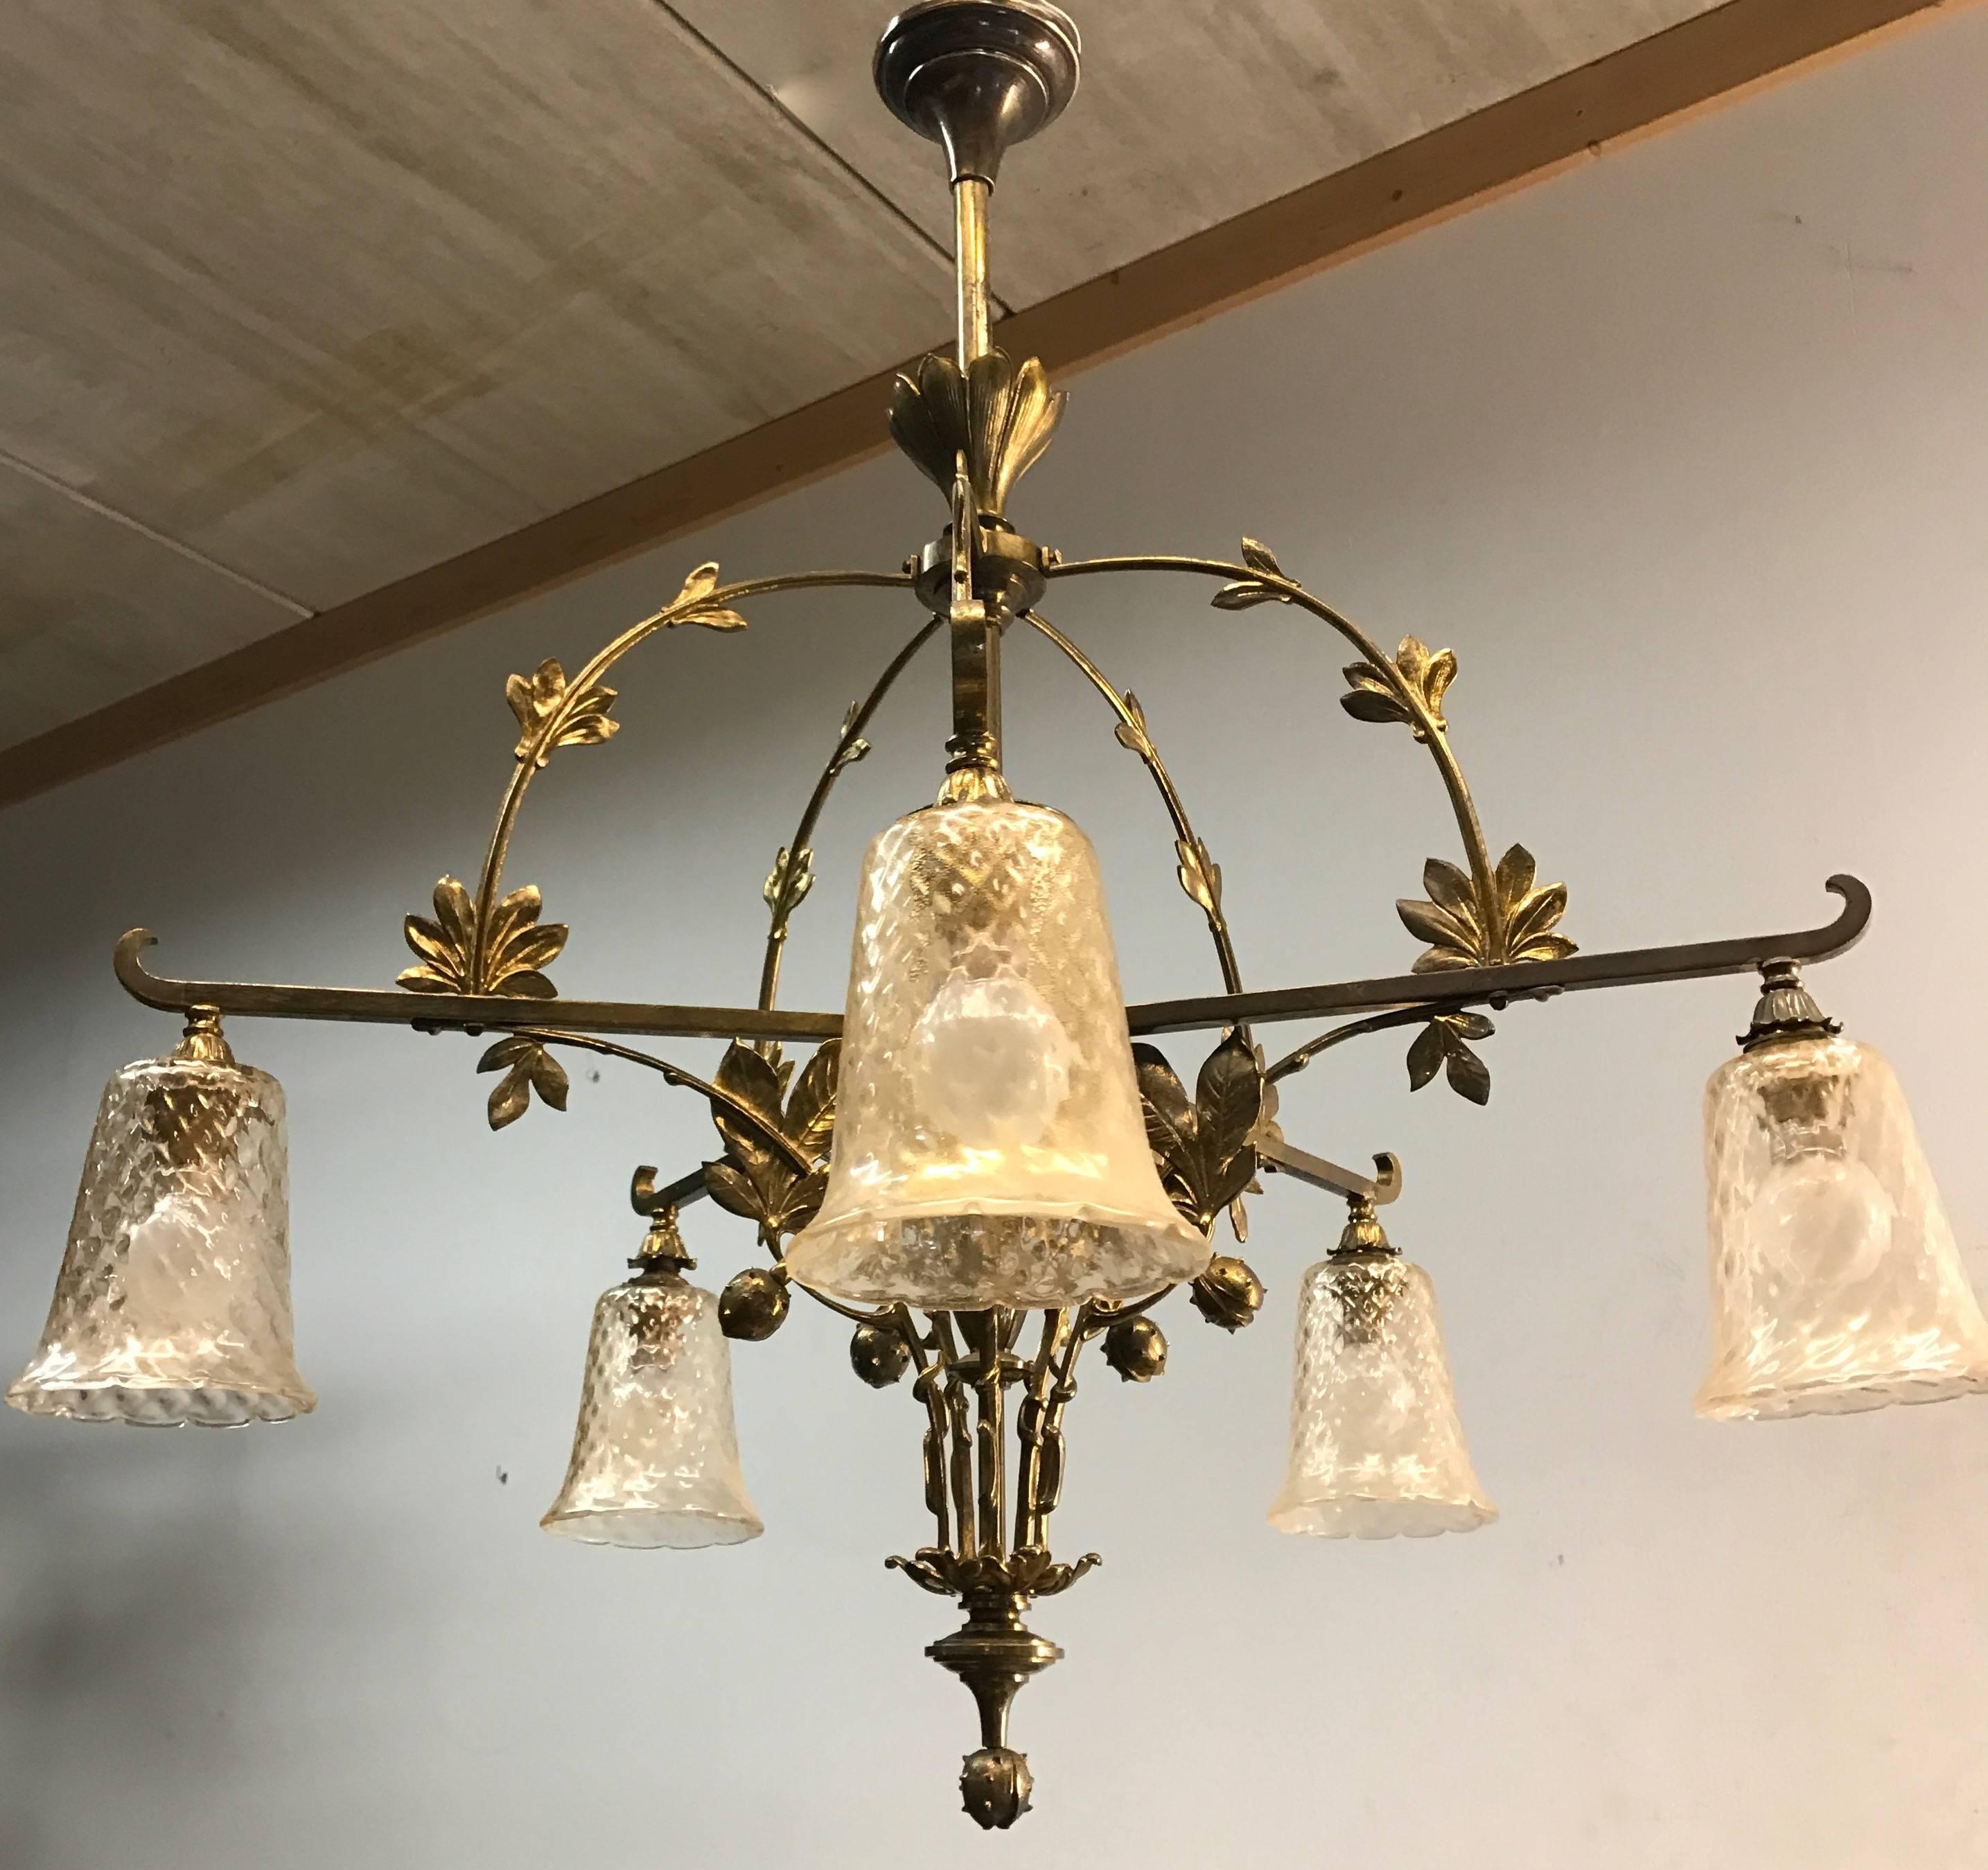 Unique and magnificent work of lighting art from the Arts & Crafts / Jugendstil / Art Nouveau era.

The maker of this unique and top quality chandelier from the early 20th century was definitely inspired by the beauty of nature. The realistic and